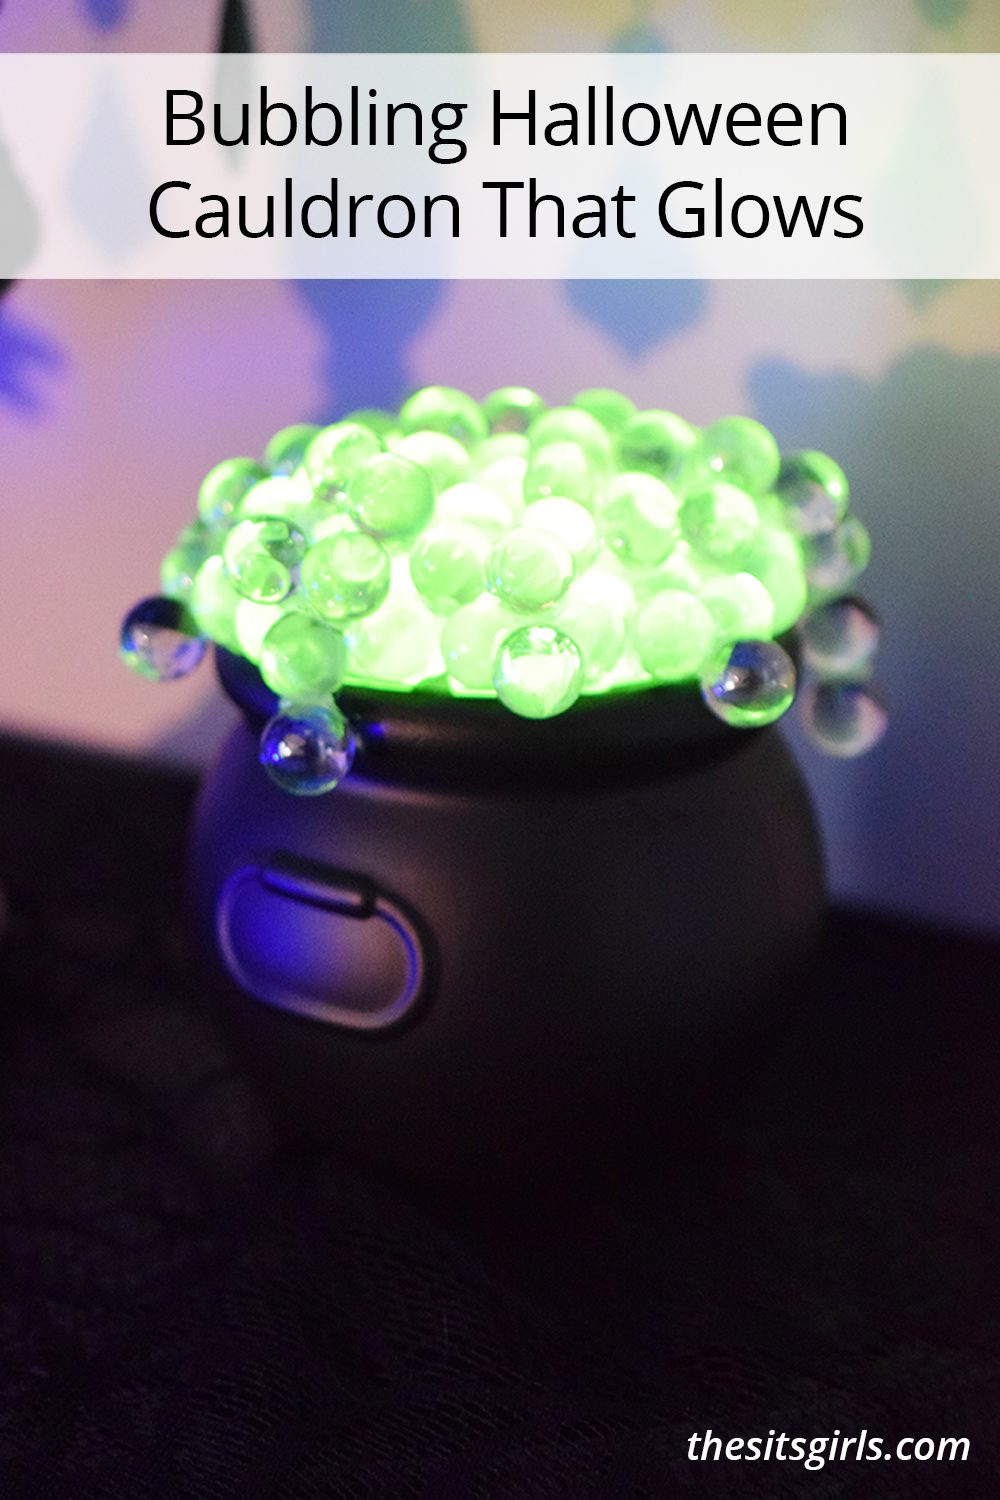 Bubbling cauldron that glows with bright green light under the bubbles.